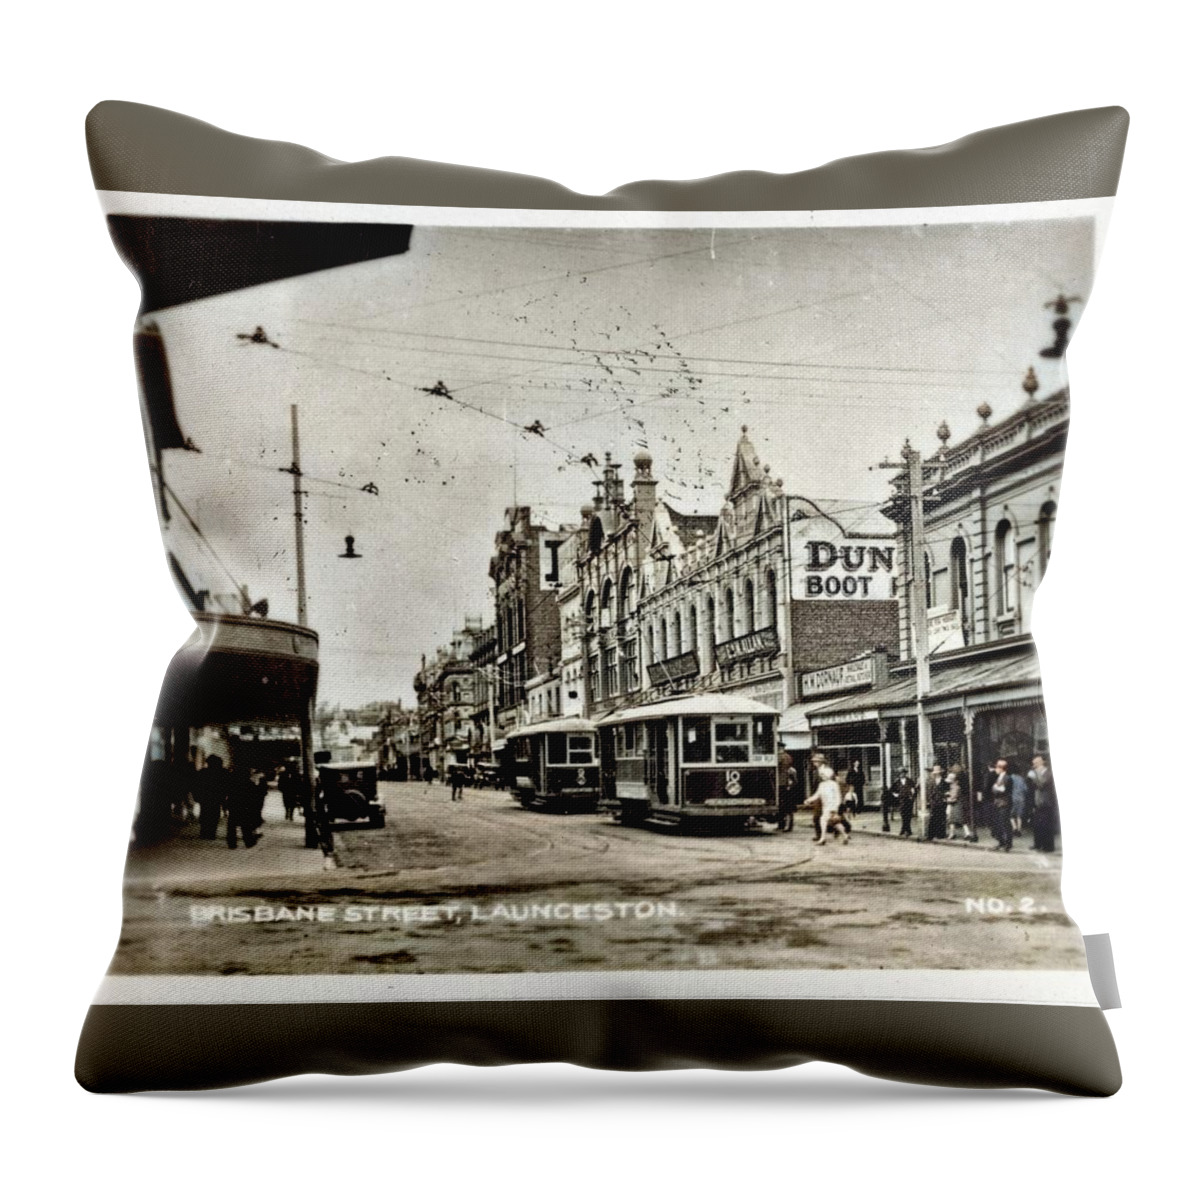 Colorized Throw Pillow featuring the painting Brisbane Street, Launceston and trams. c1930 colorized by Ahmet Asar by Celestial Images